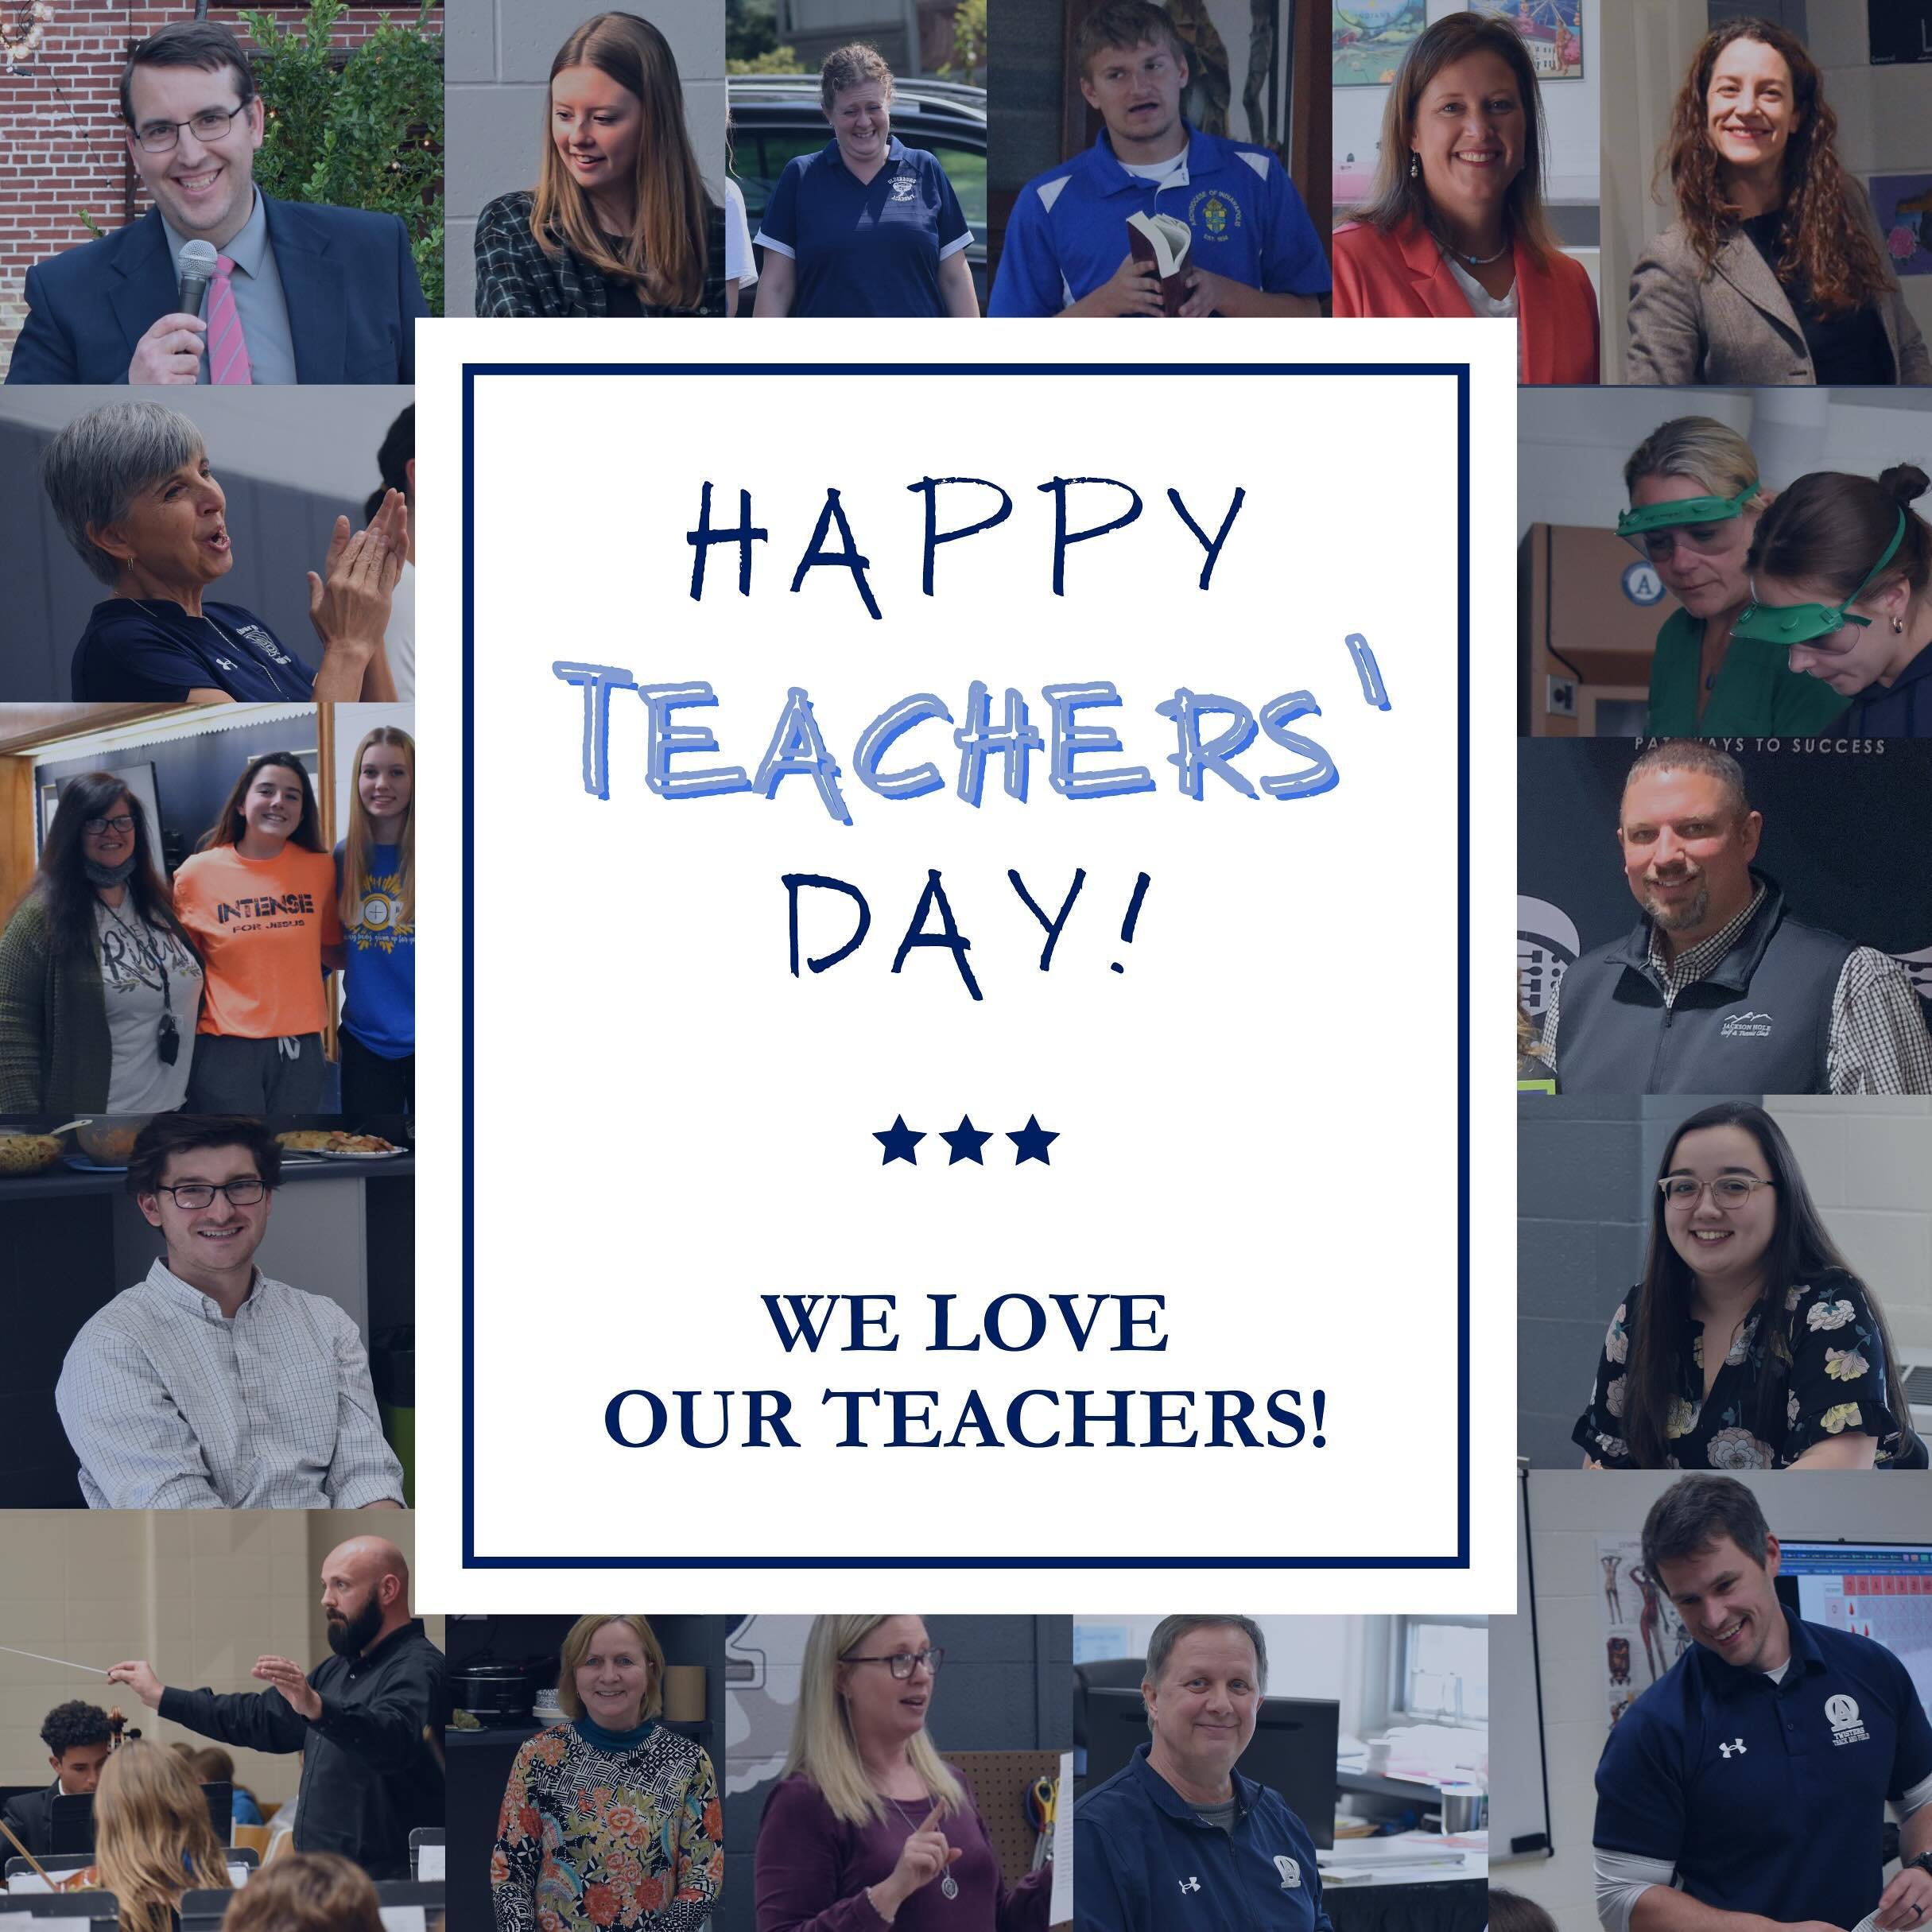 Happy Teachers&rsquo; Day to all of our wonderful OA teachers! 

We are so lucky to have you as such important individuals in our OA family, motivating and encouraging our students to learn and grow everyday!